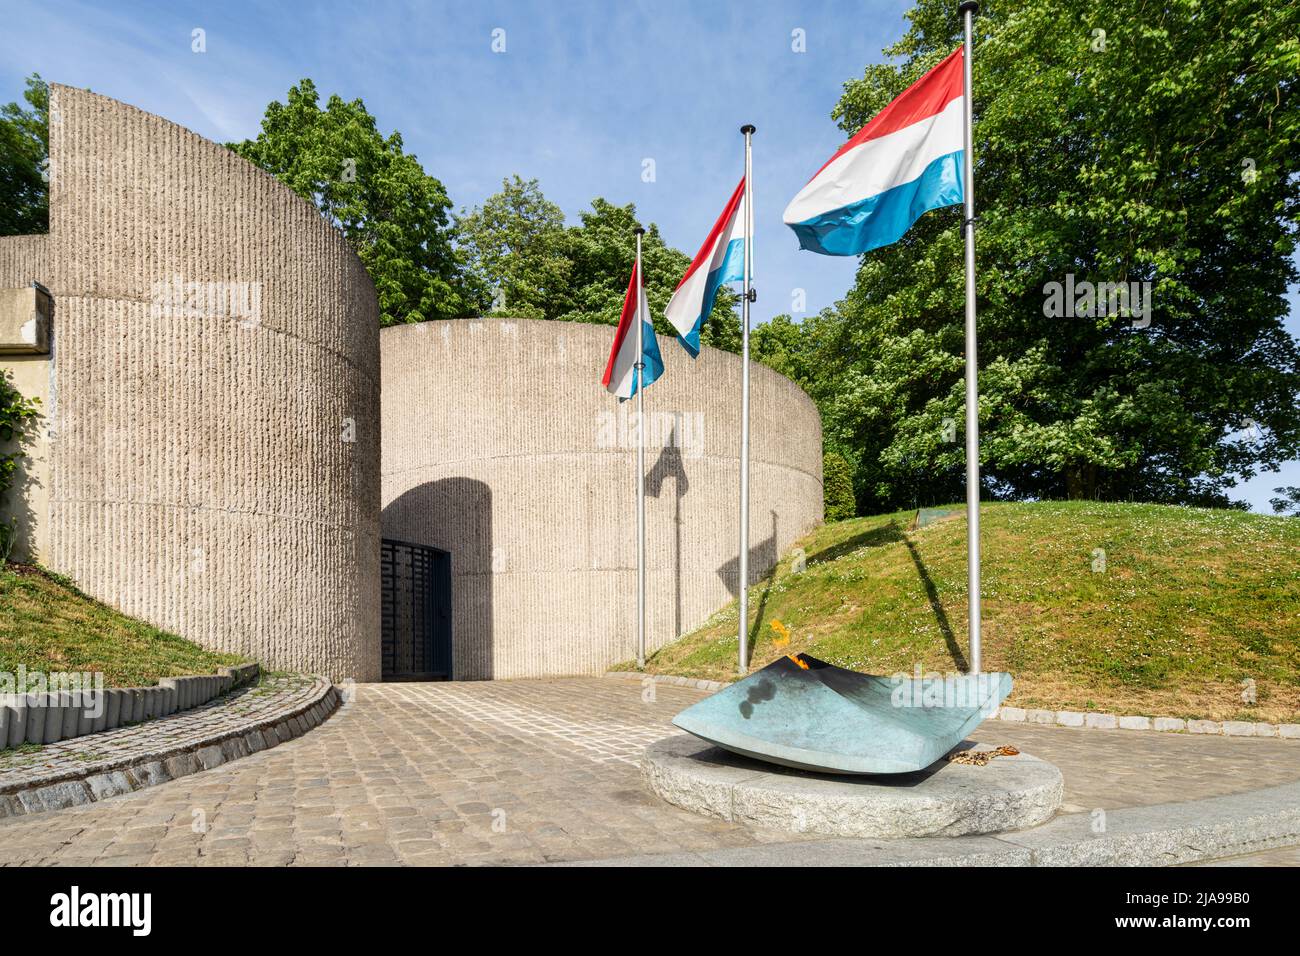 Luxembourg city, May 2022.  view of the Monument National de la Solidarité Luxembourgeoise in a city center park Stock Photo